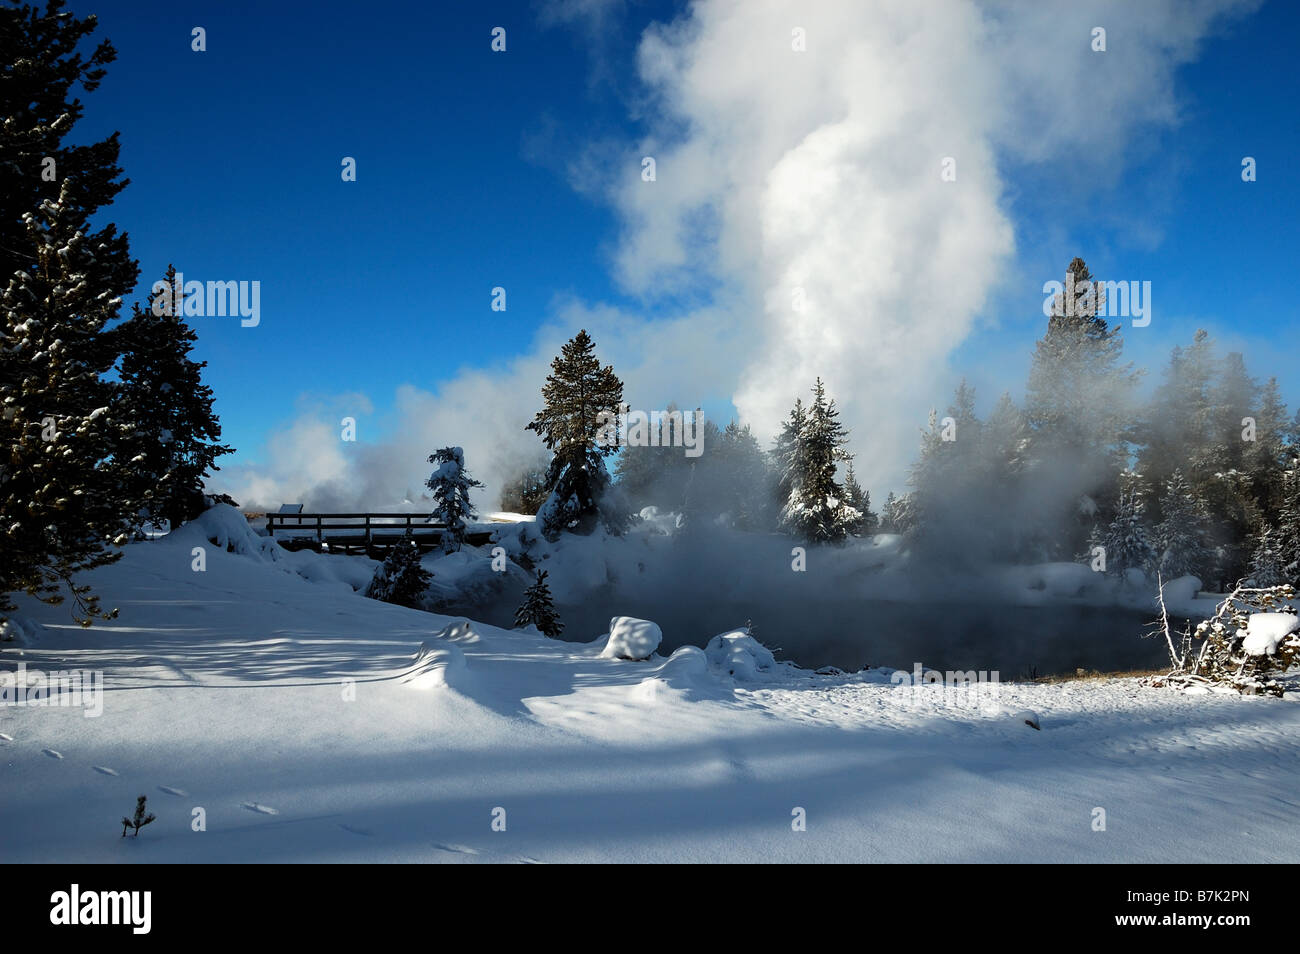 Hot spring and fumarole. The Yellowstone National Park, Wyoming, USA. Stock Photo